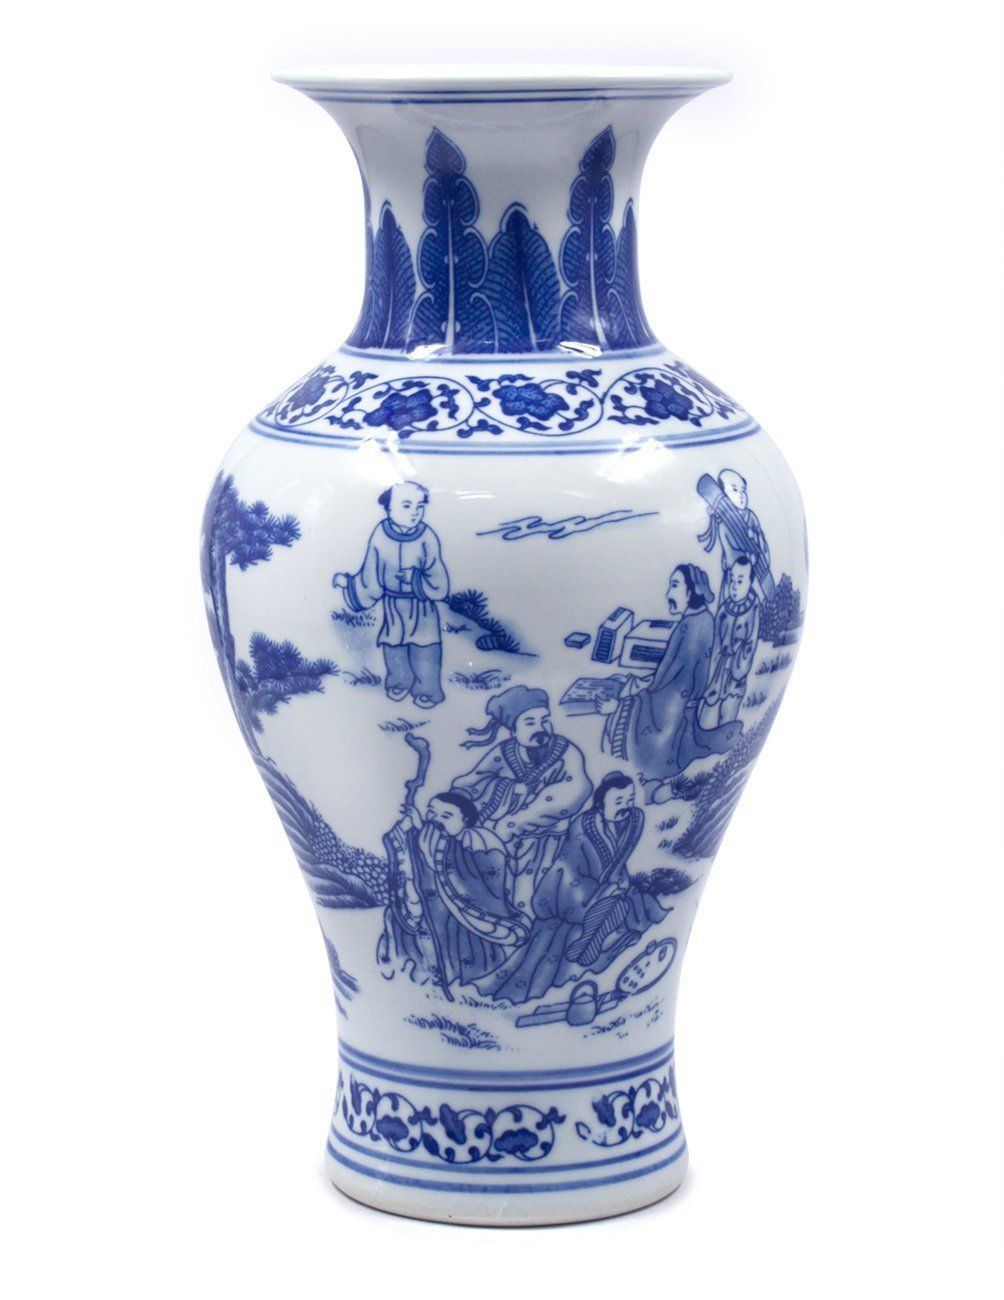 24 Inch Flower Vase Of Dahlia Friends Enjoying Nature Blue and White Porcelain Flower Vase Pertaining to Dahlia Friends Enjoying Nature Blue and White Porcelain Flower Vase 13 Inches Fish Tail Vase to View Further for This Item Visit the Image Link